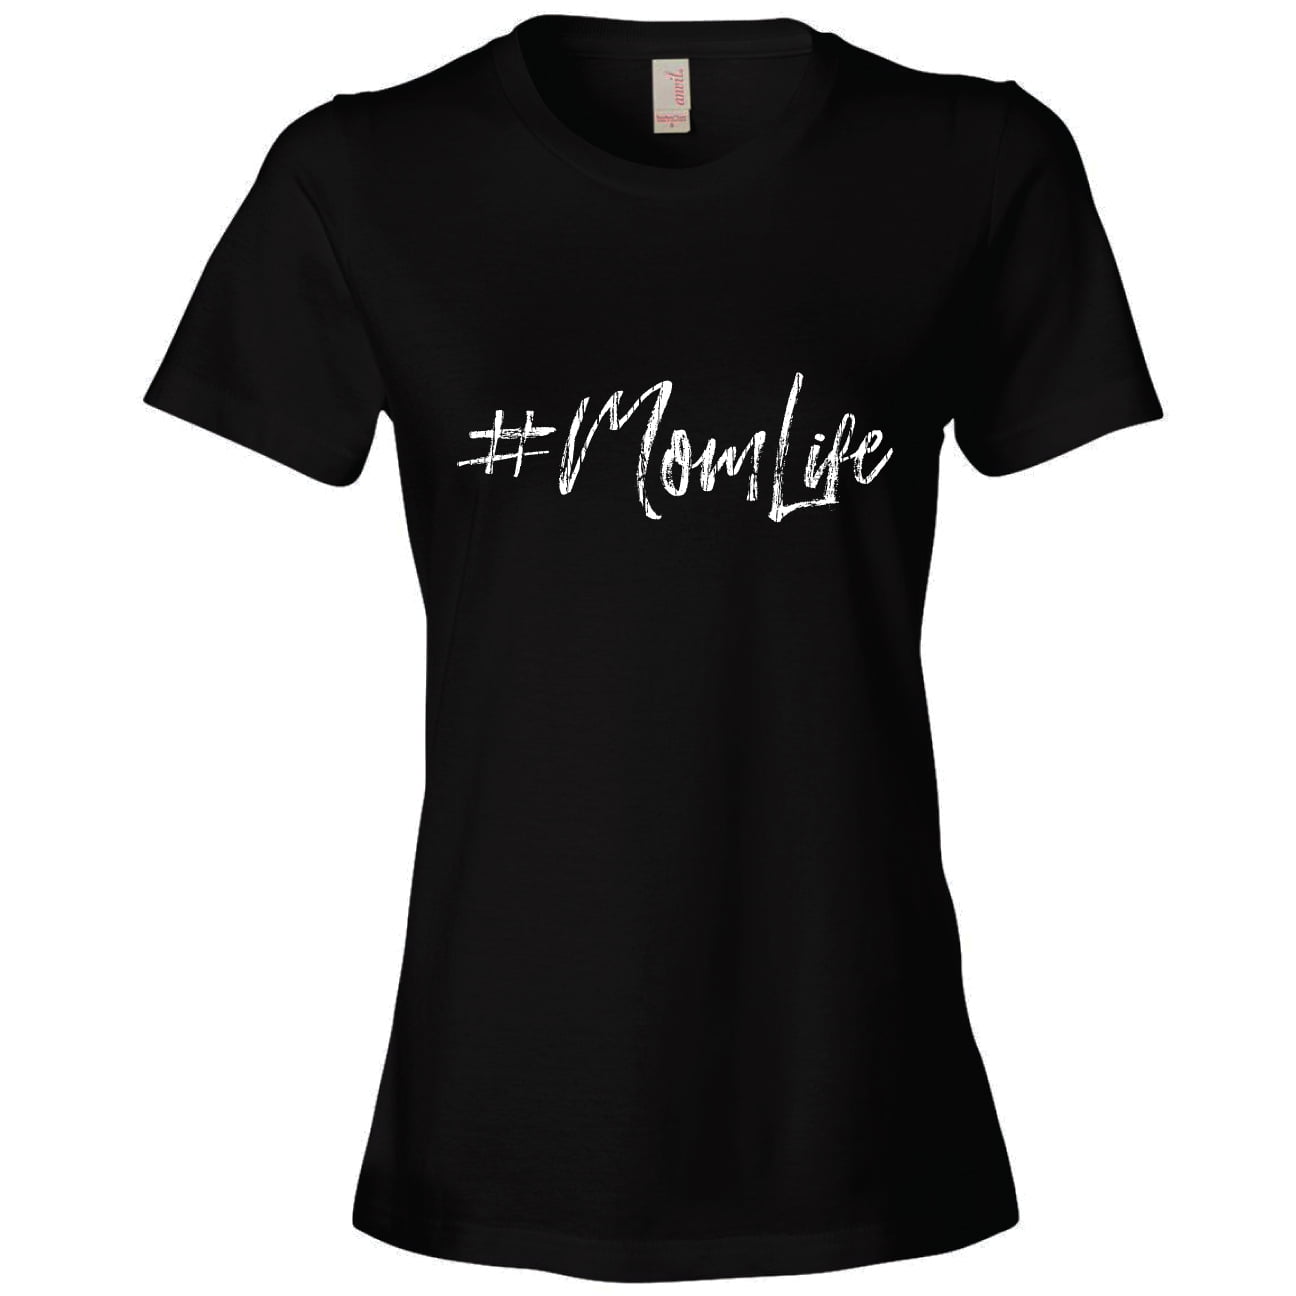 Hashtag Mom Life mom life Tee Cute Tshirt for Mom #Momlife Shirt Mommy shirt Mom Life T Shirt Gift for Mom Wife Mothers Day Gift